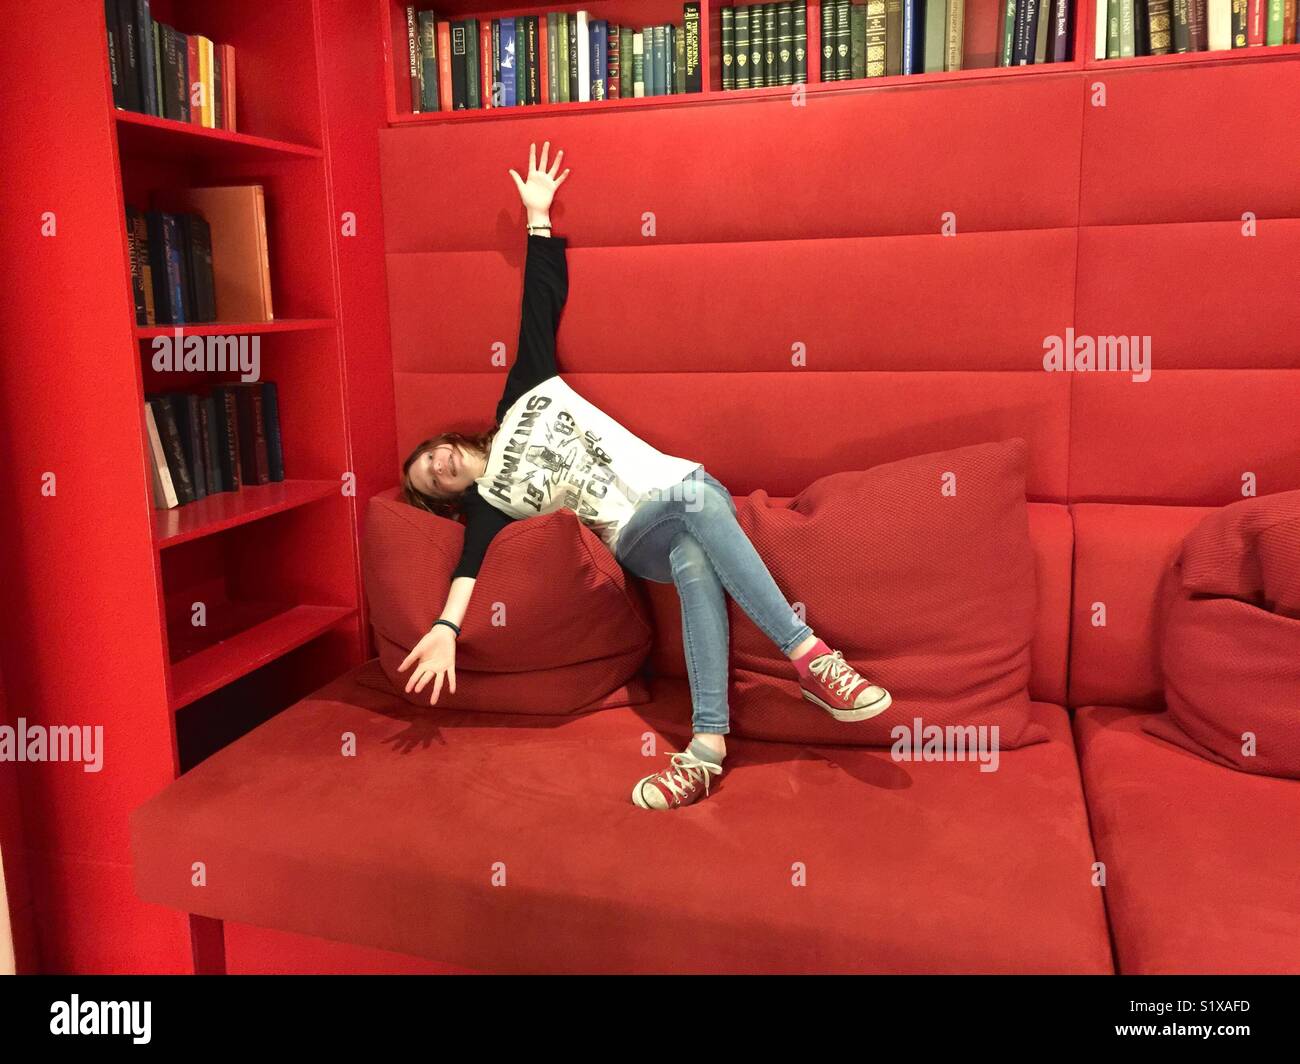 Girl on big red couch. Stock Photo